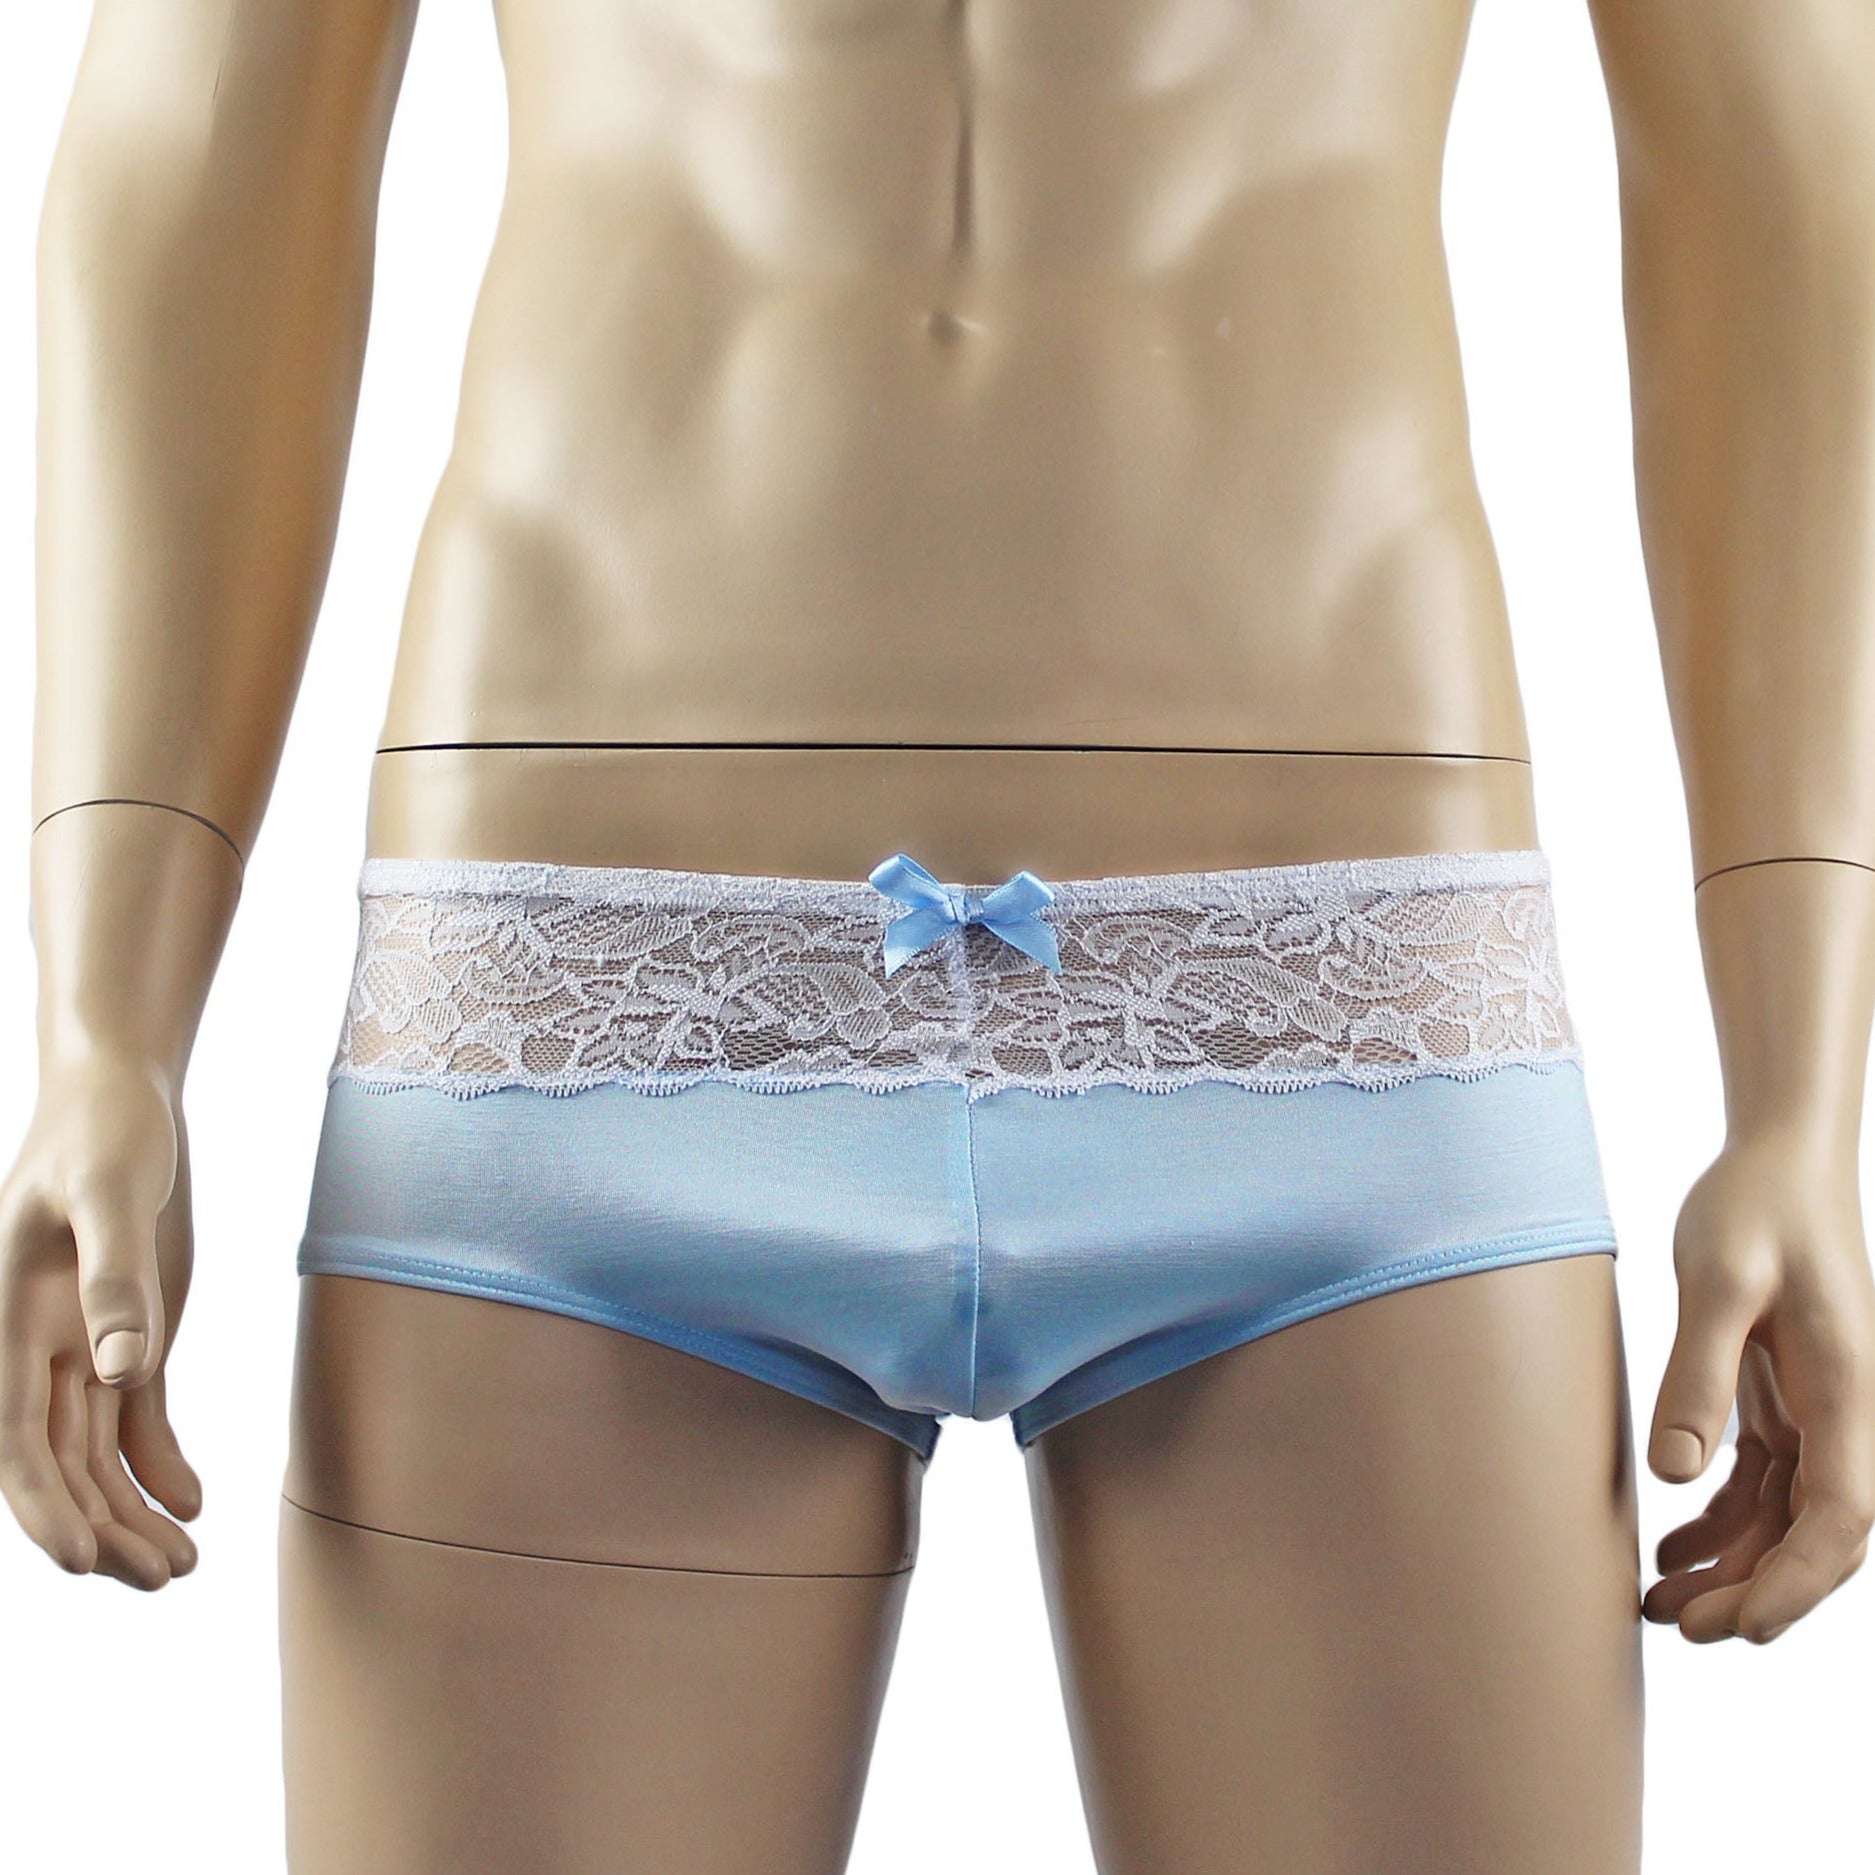 Mens Joanne Underwear Lacey Lovelies Boxer Brief Panties Light Blue and White